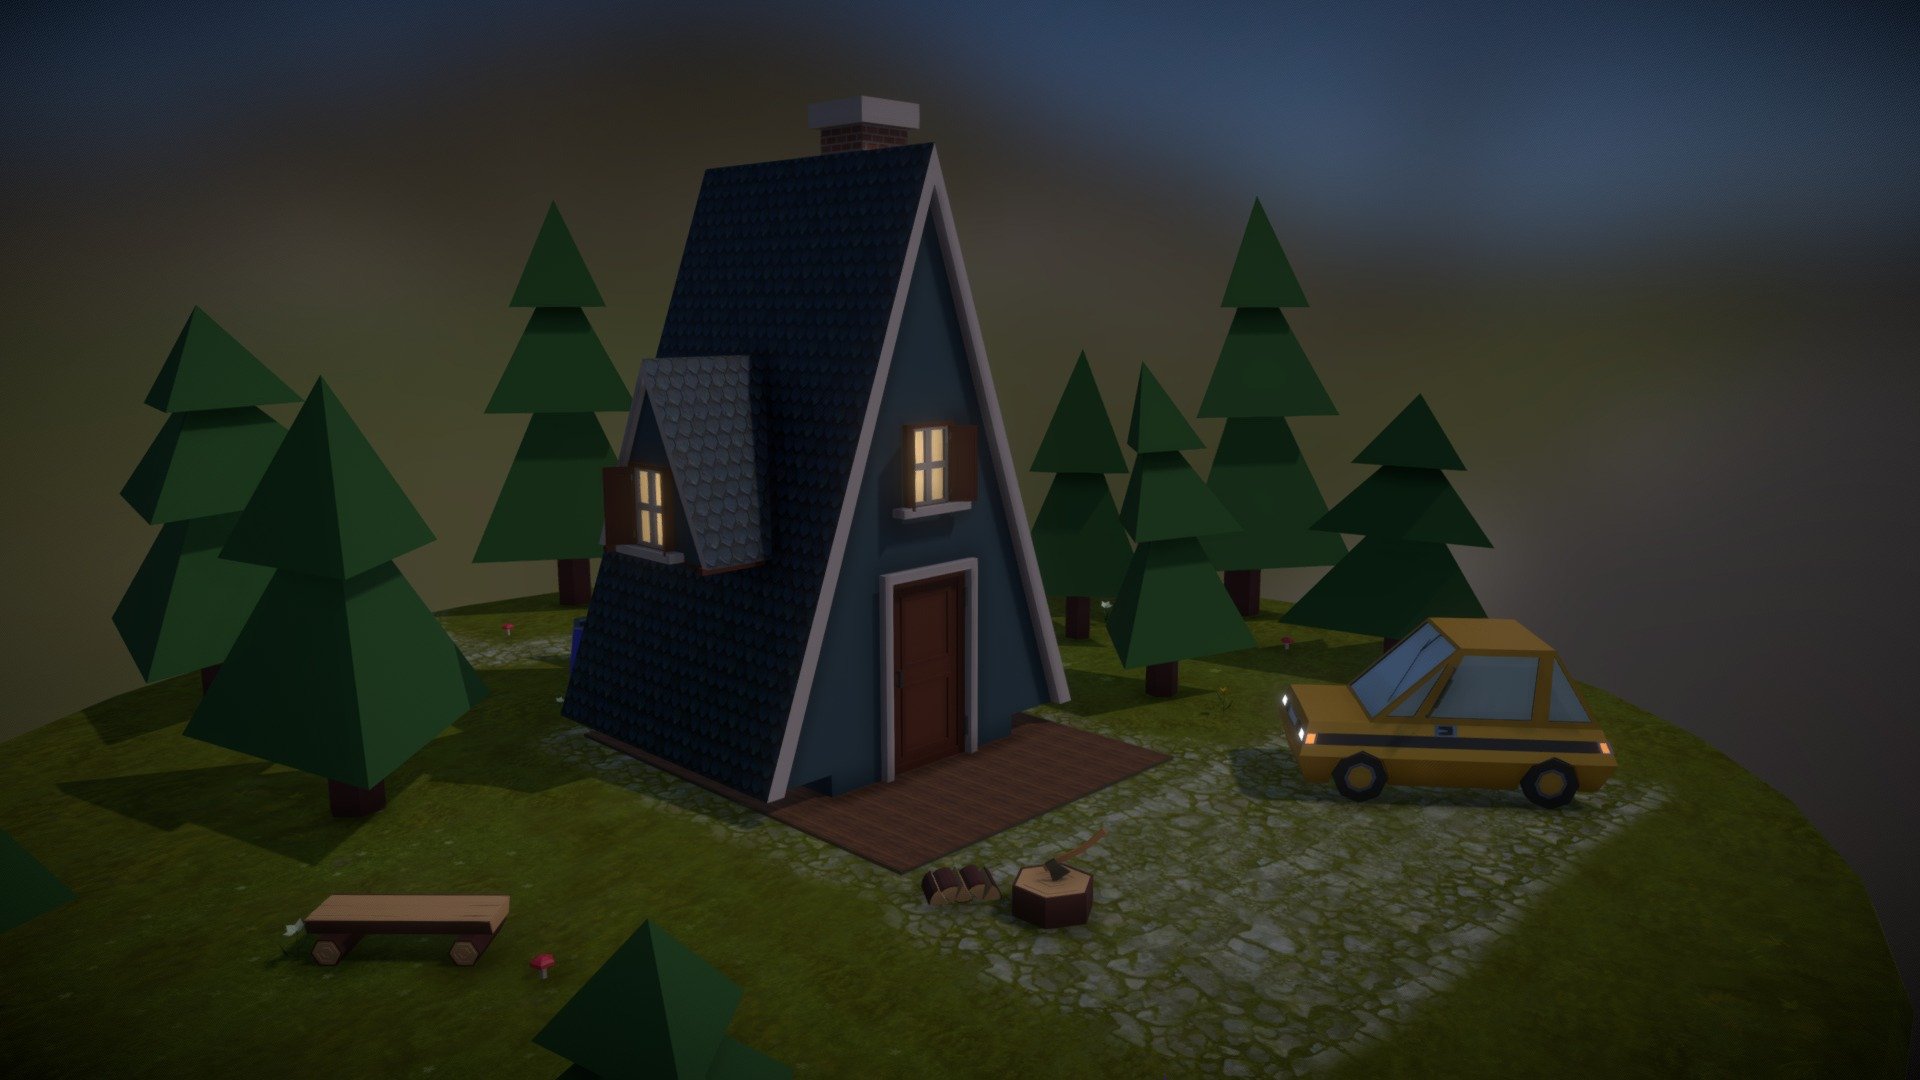 The base idea for this scene is a task from one of VK's Blender learning groups. But because the course itself is paid, I just used several final renders from other students as a references. So my scene is my implementation of this idea: small house in a woods, made with lowpoly technic. In my implementation it's nowadays time, thus I added a car and electric-like lights inside. Making this project from ground zero took about 10 hours. In this project I used texture paint mode and mirroring modifier for the first time. Lowpoly modeling is a new topic for me, so I like the result I got, with using minimum  of textured surfaces. 

The ground texture is hand-painted mix of several good and free textures, I found all over the Pinterest. 
Some of building's textures are also come from Pinterest. The bricks are come from @scadl

The project are made with Blender 2.90.1, rendered with Cycles 3d model